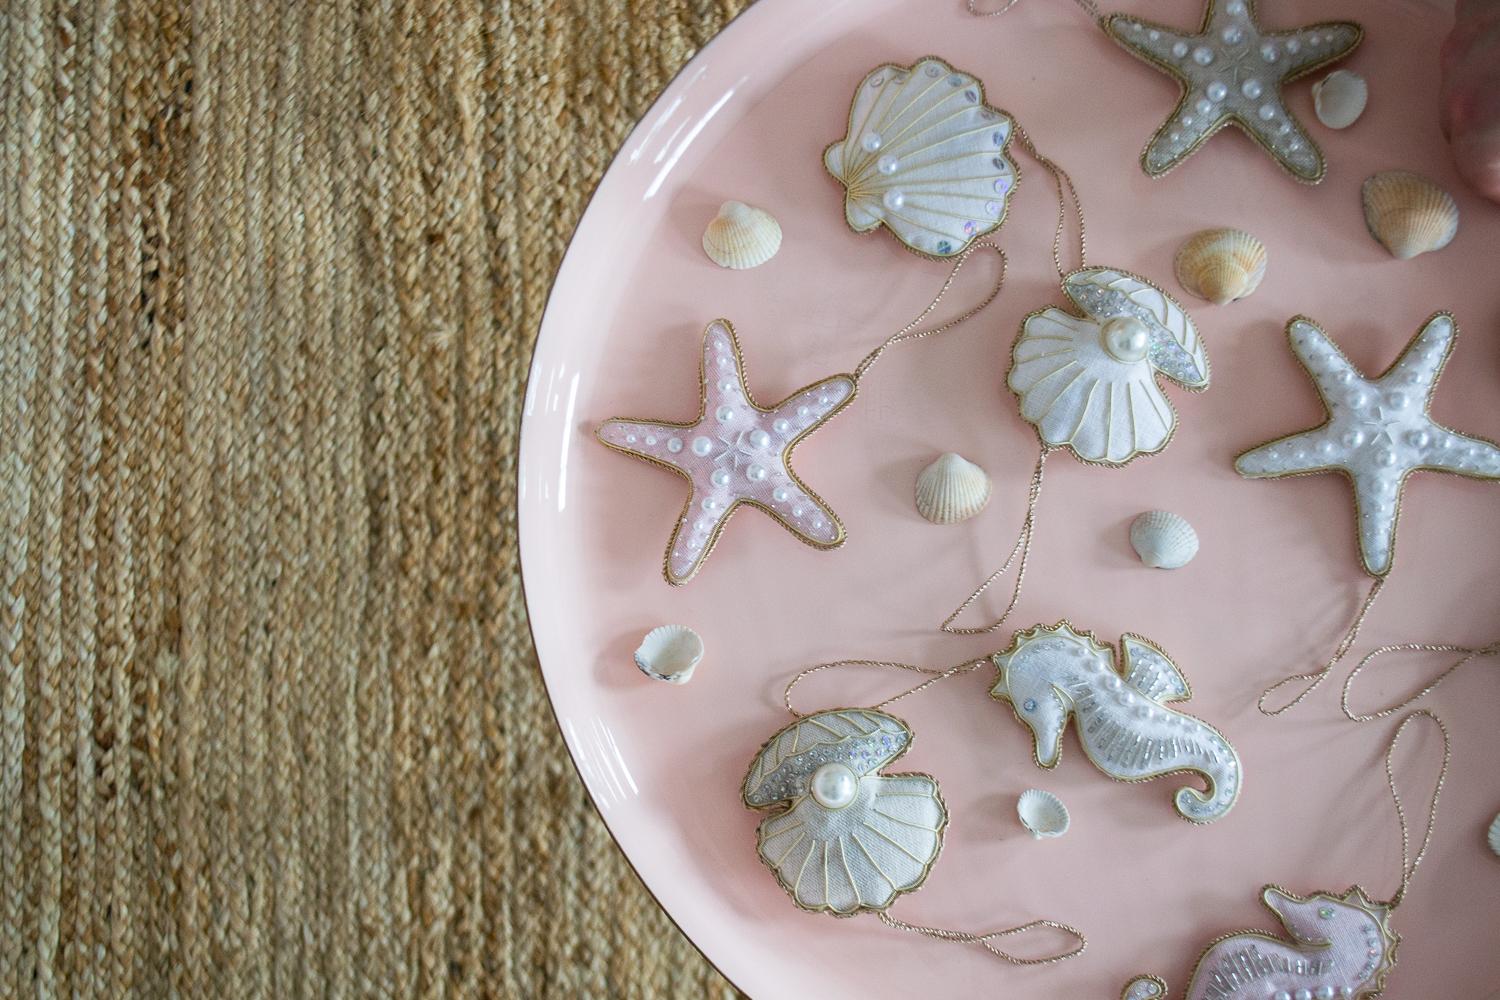 Set of 9 Limited Edition Artisan Irish Linen Seahorse starfish shell ornaments in pastel pinks by Katie Larmour 

This is a luxury box set of artisan made decorative ornaments created with authentic Irish Linen, exclusive to 1stdibs. They are